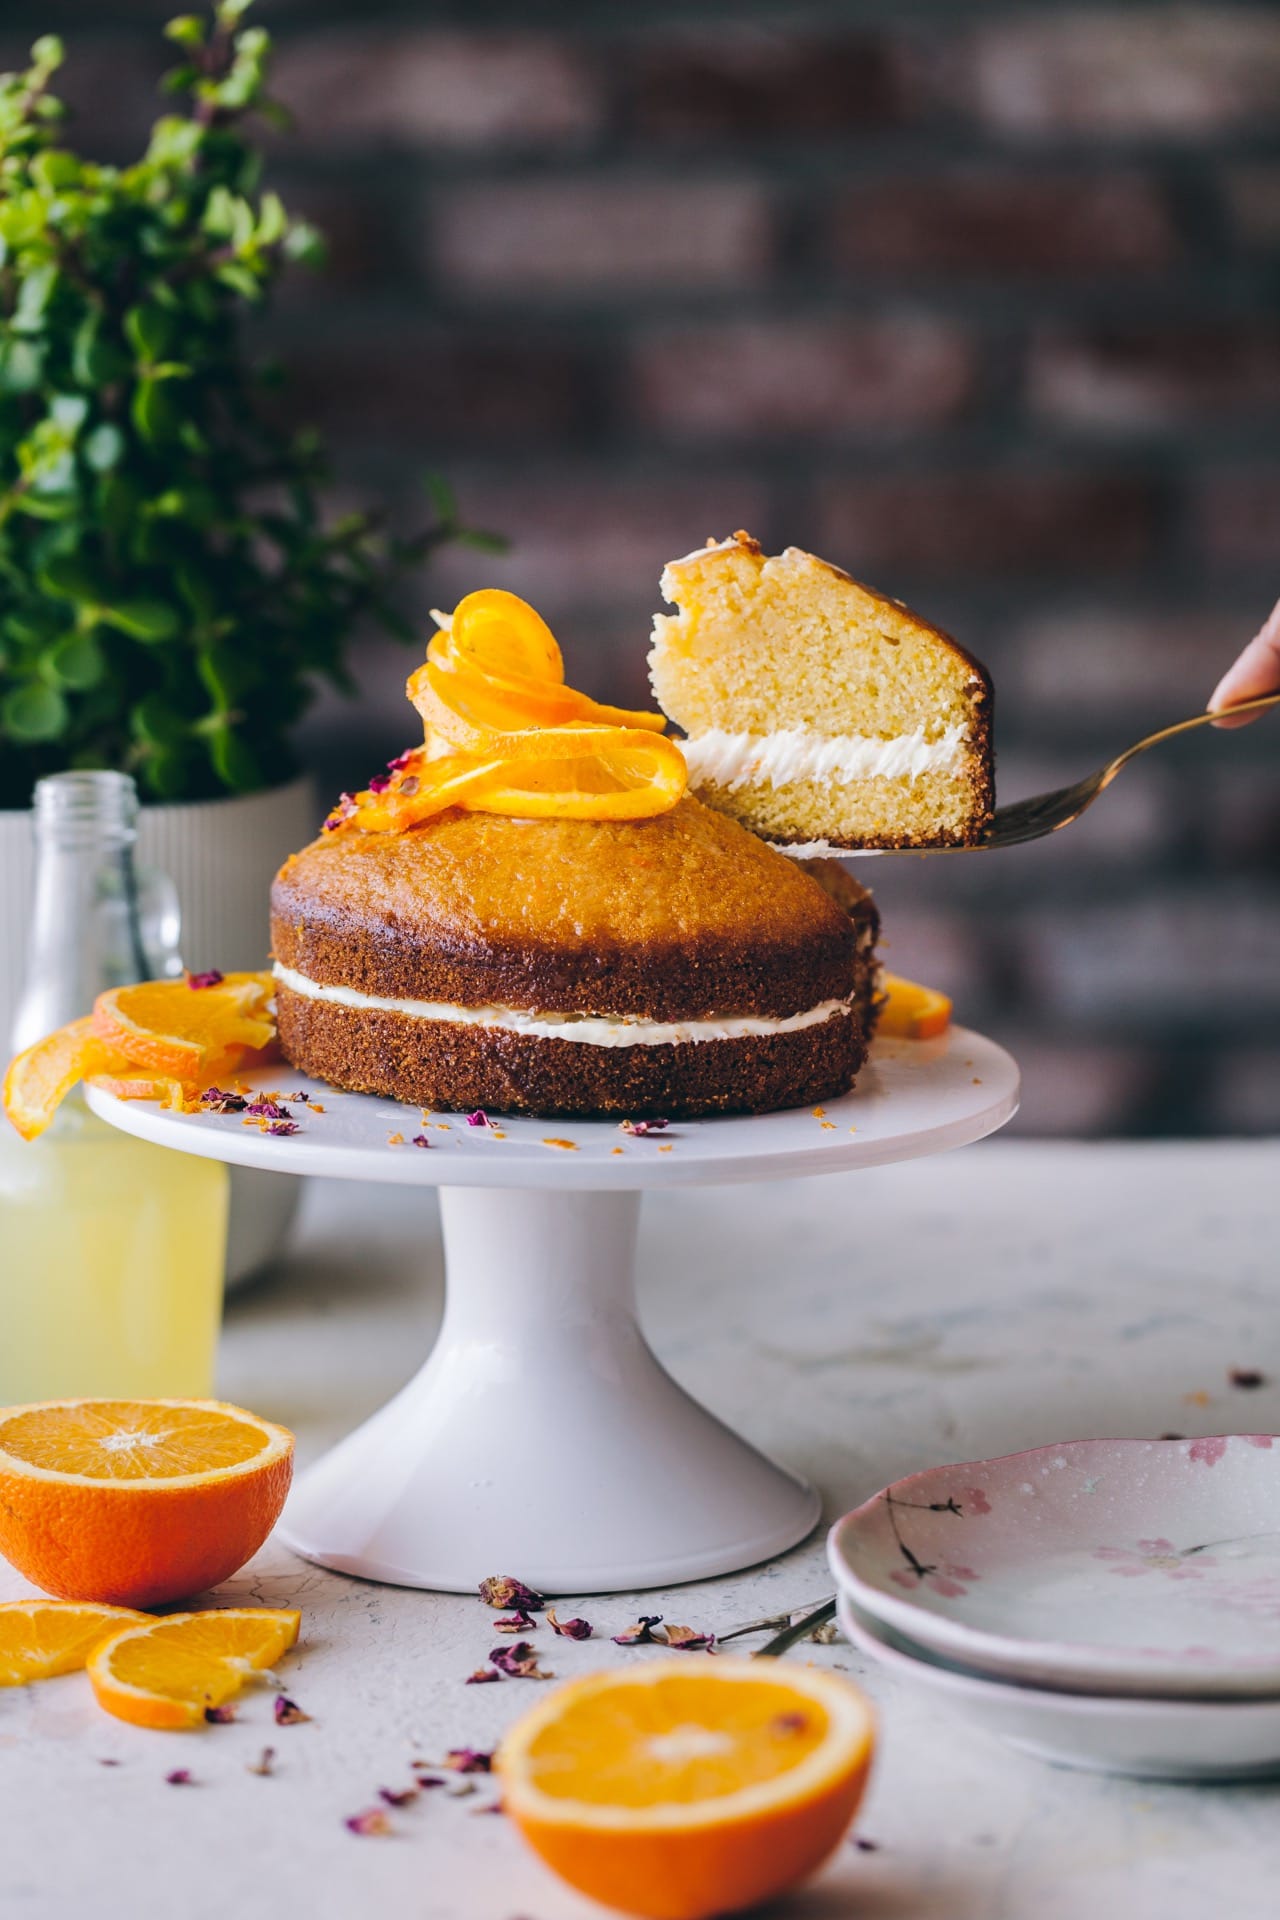 Orange Cornmeal Cake | Playful Cooking #cake #orangecake #cornmealcake #foodphotography This shop has been compensated by Collective Bias, Inc. and its advertiser. All opinions are mine alone. #MazolaHeartHealth #CollectiveBias